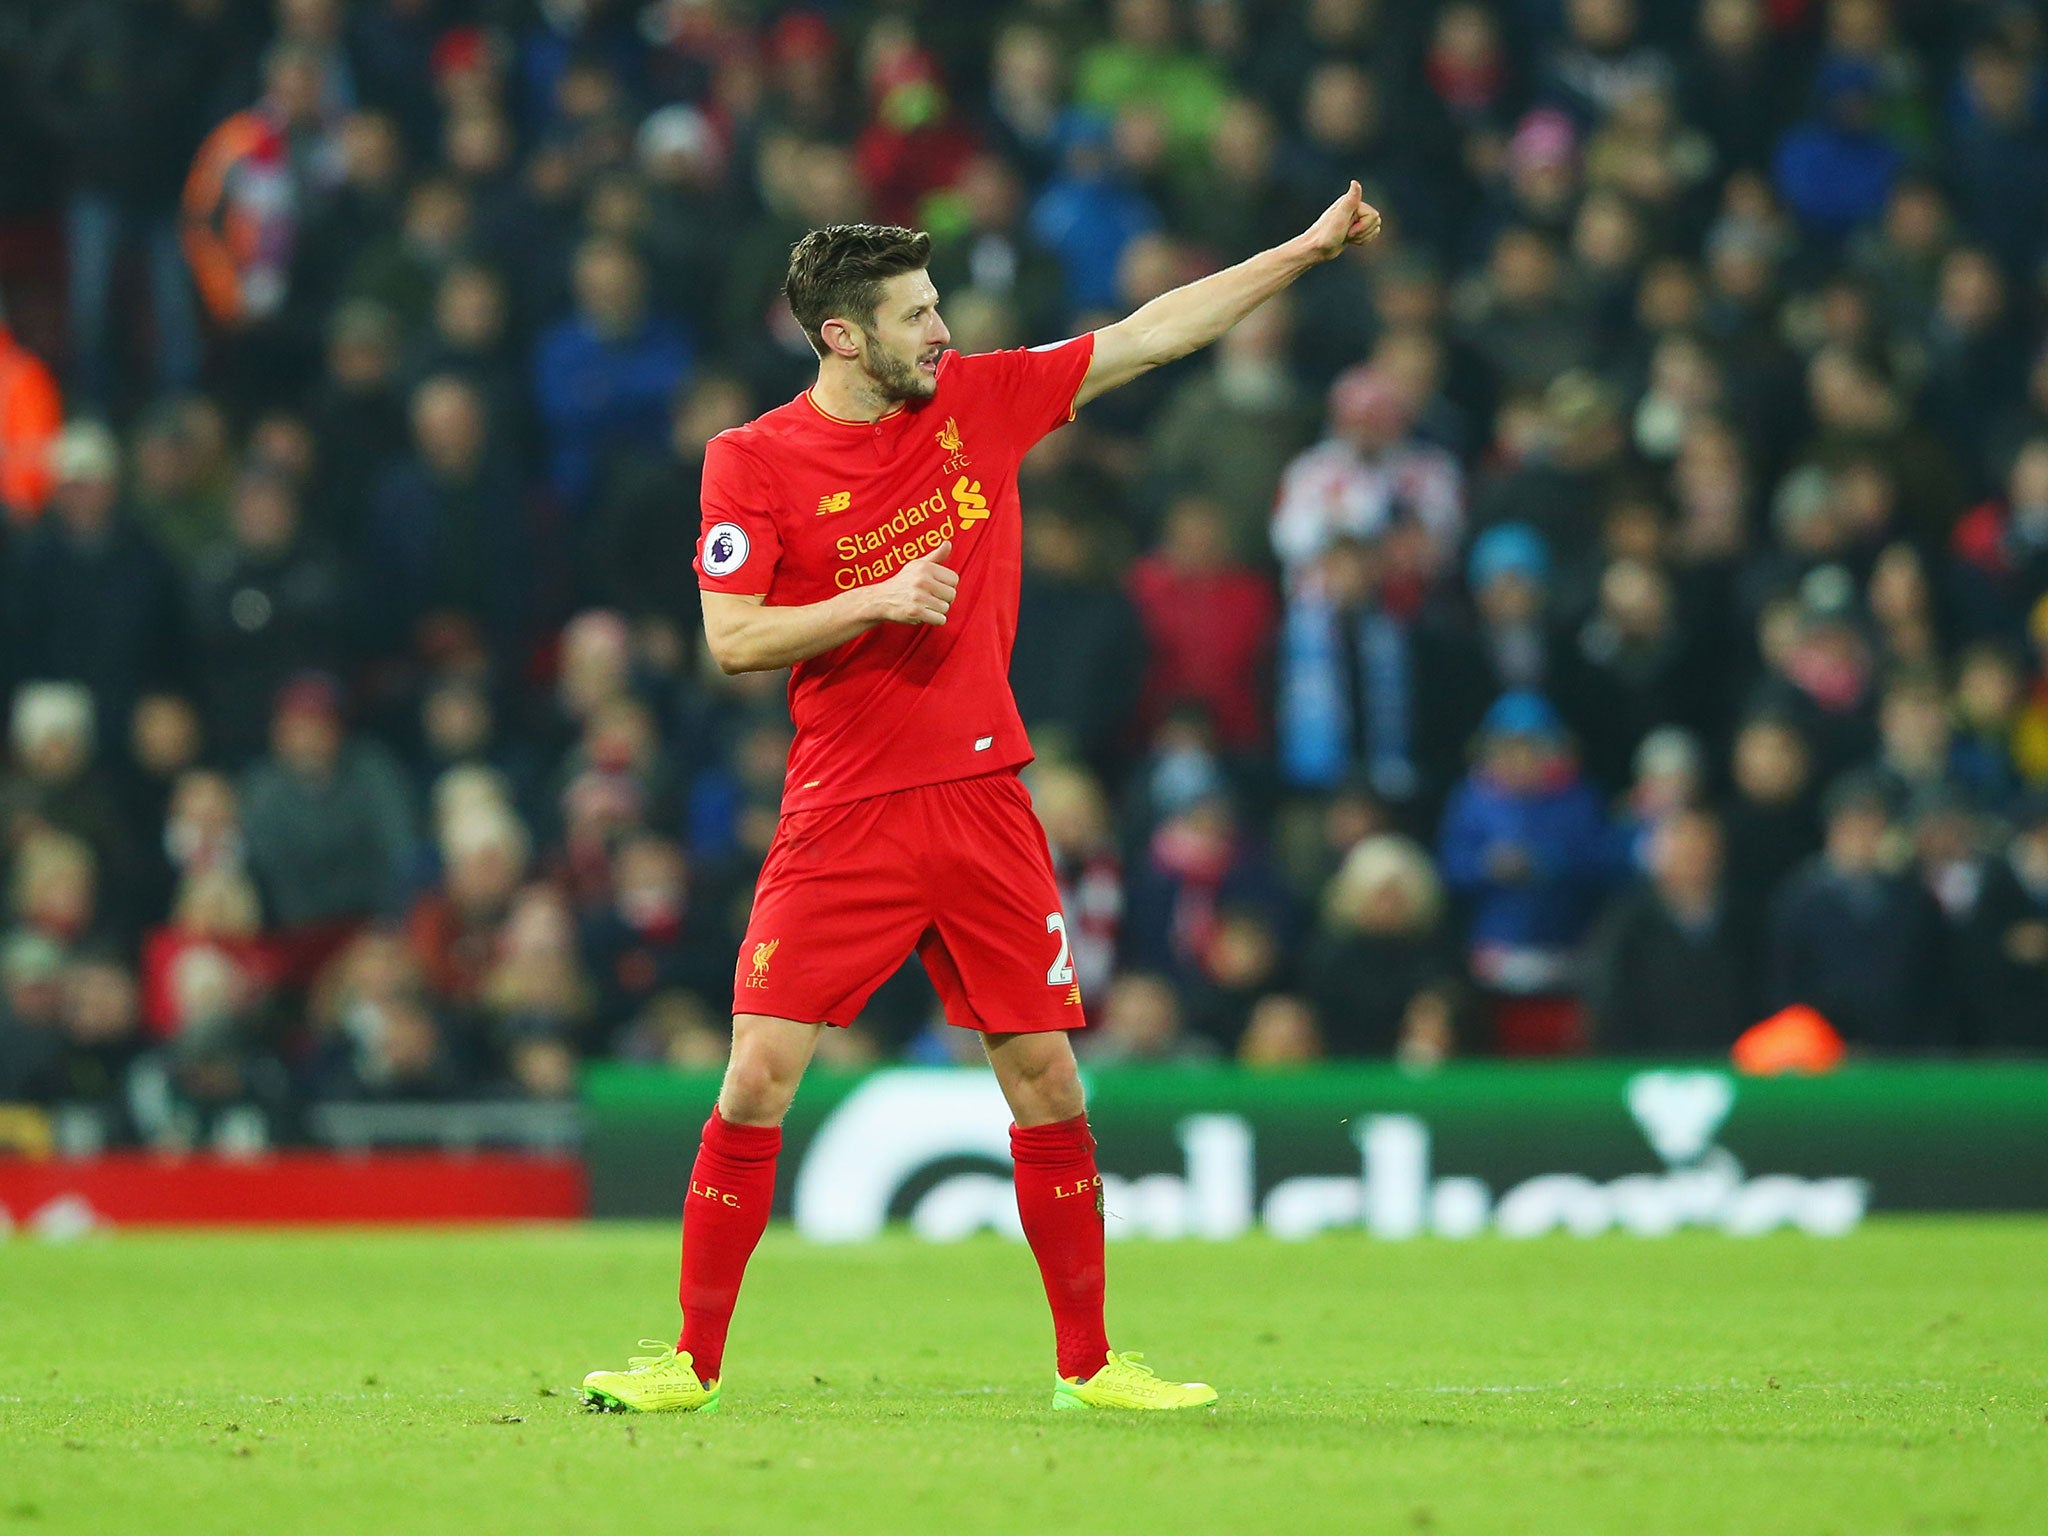 Lallana has been linked to Ligue 1 side PSG